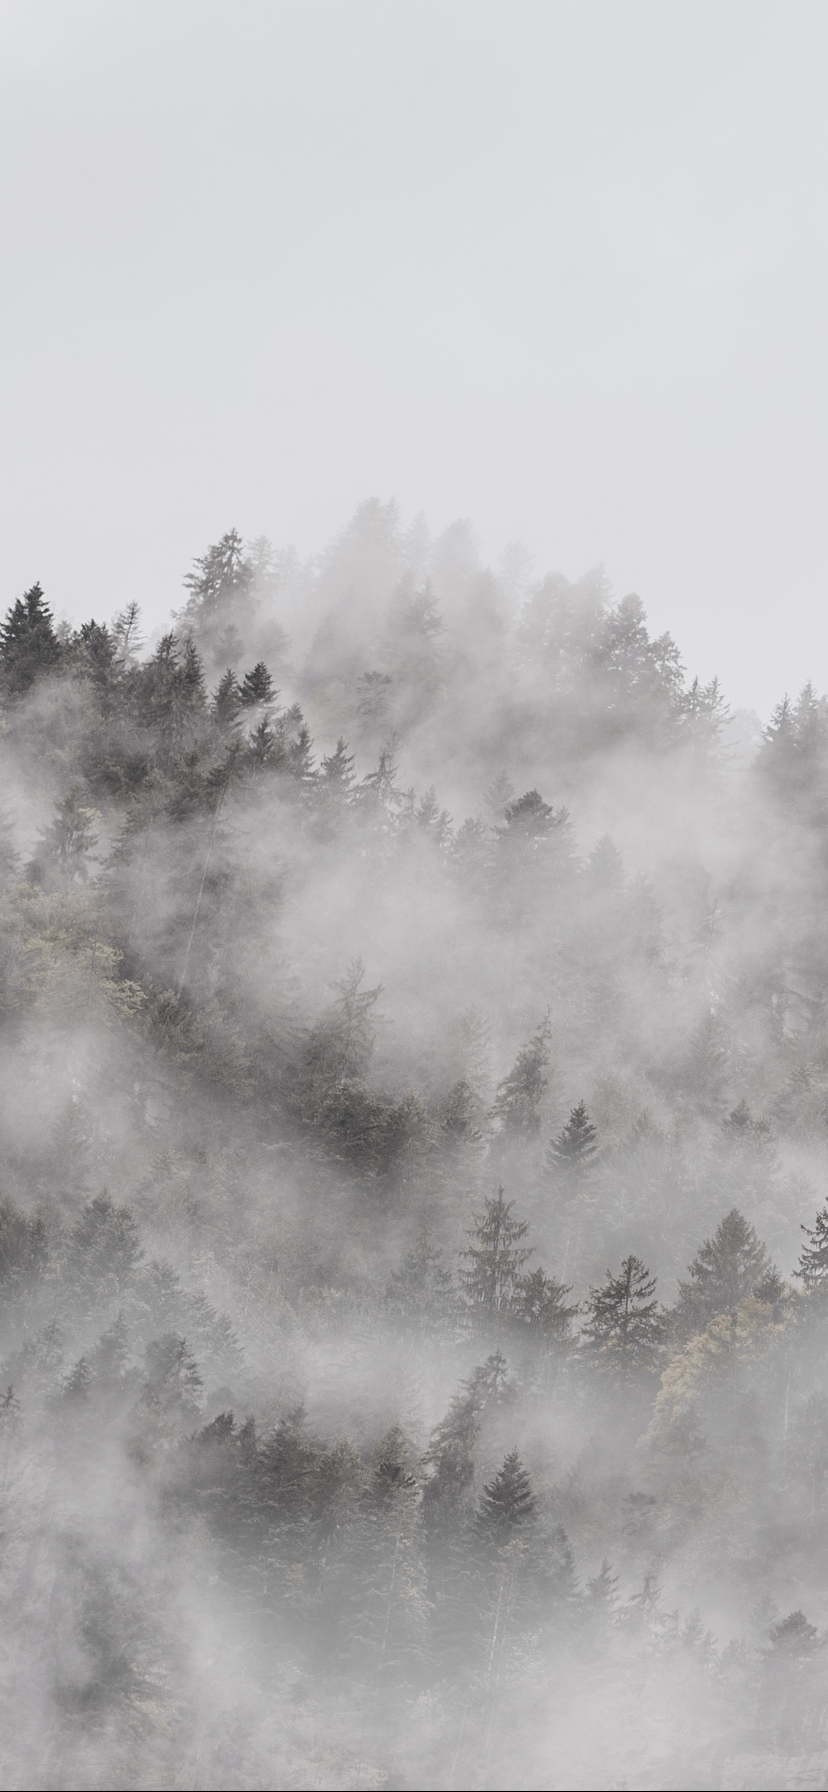 828x1792 Foggy Morning Wallpaper in 2020. Nature photography, Forest wallpaper, Photography on WallpaperBat